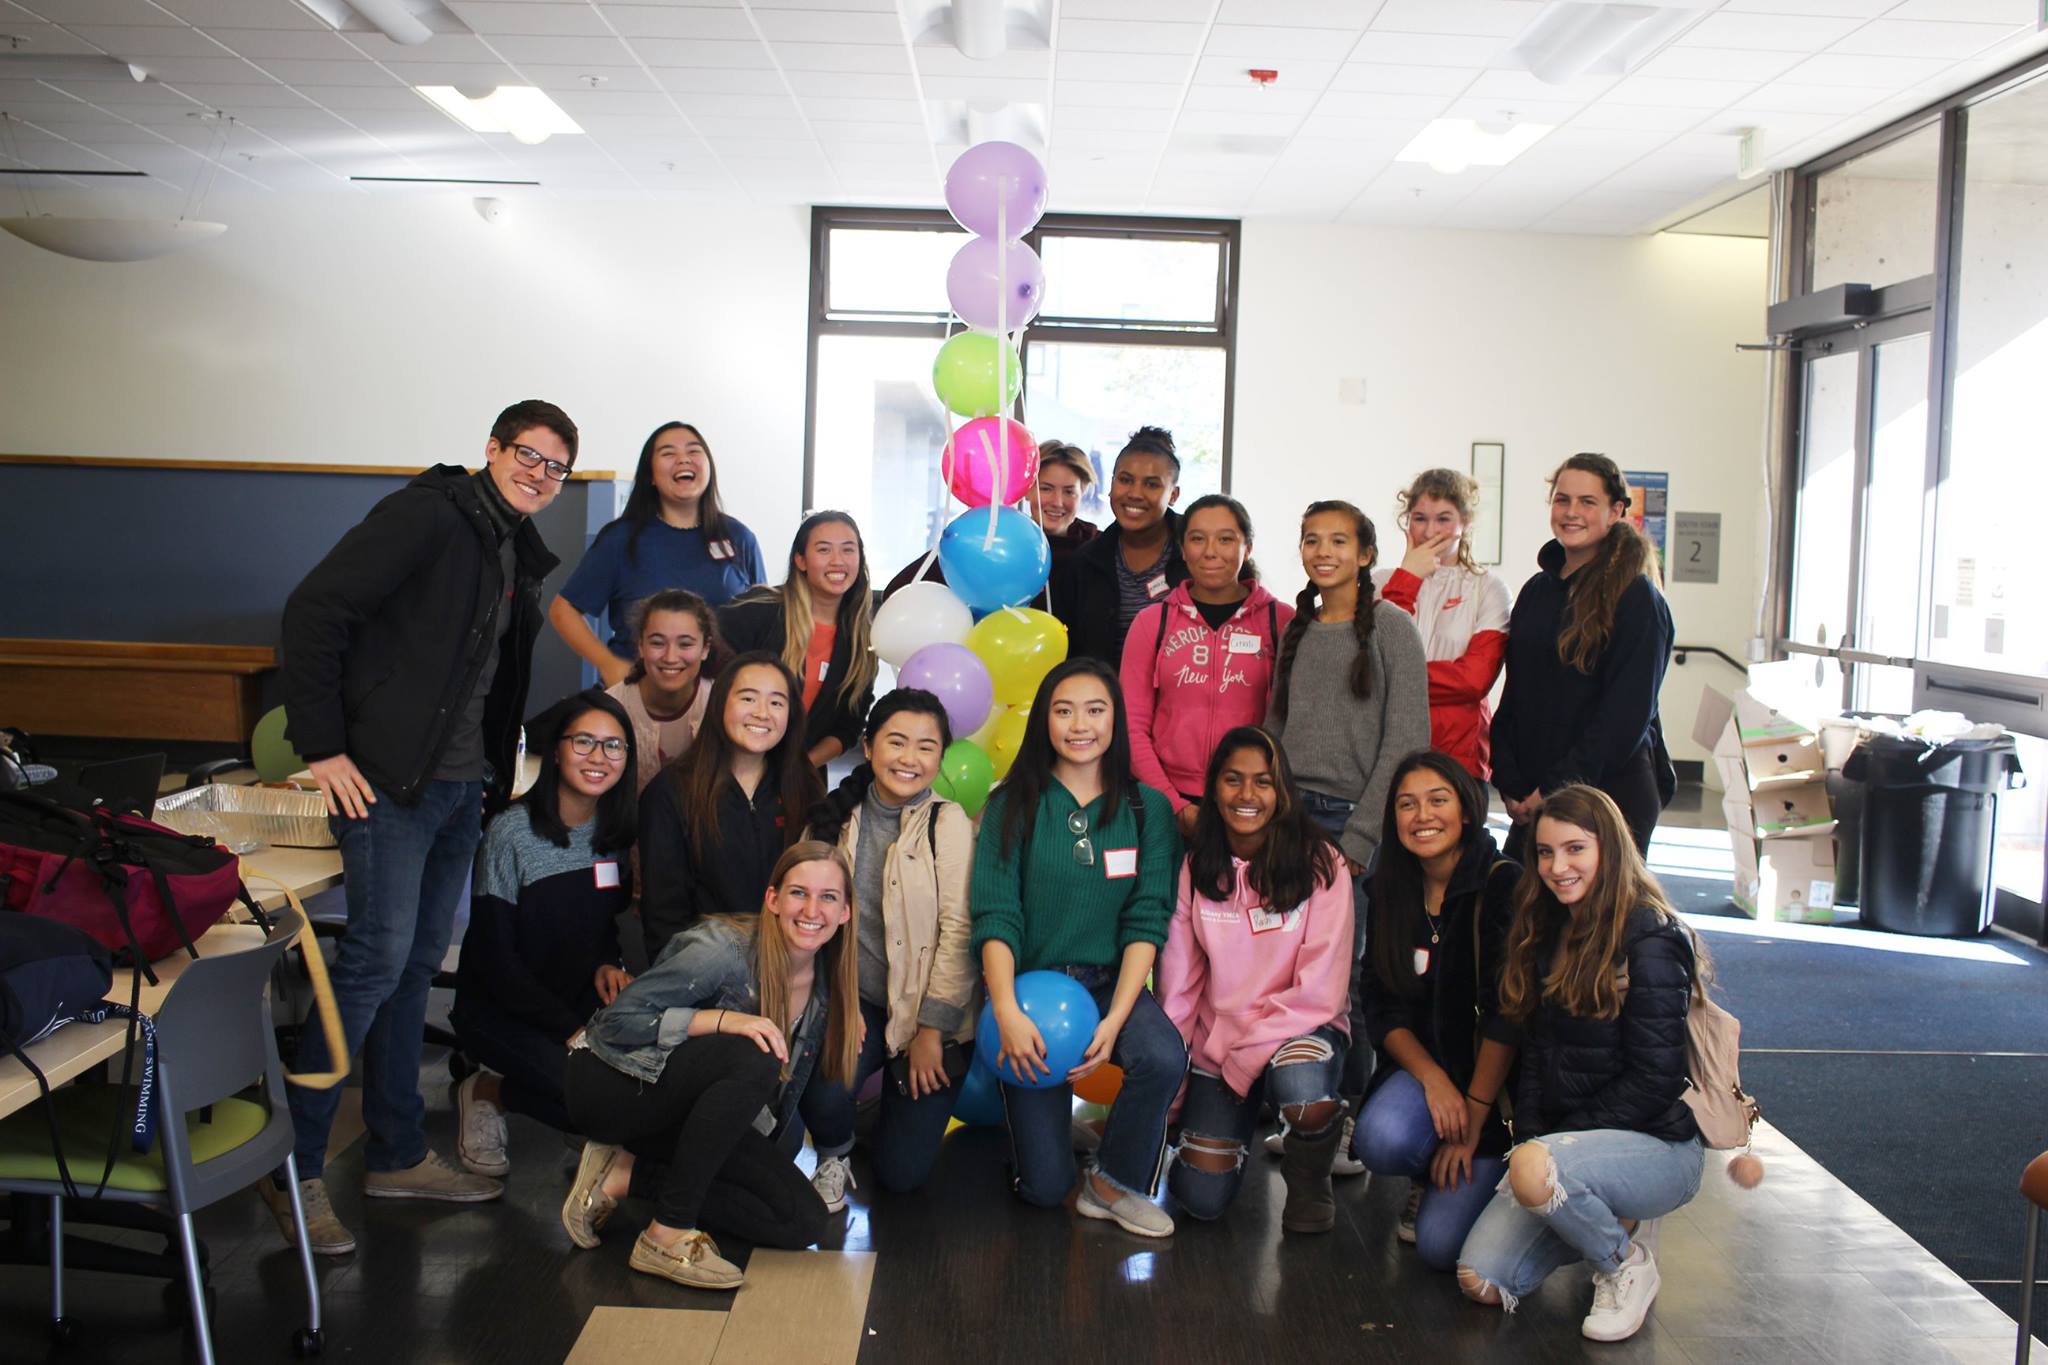 Group picture of volunteers and students holding balloons.